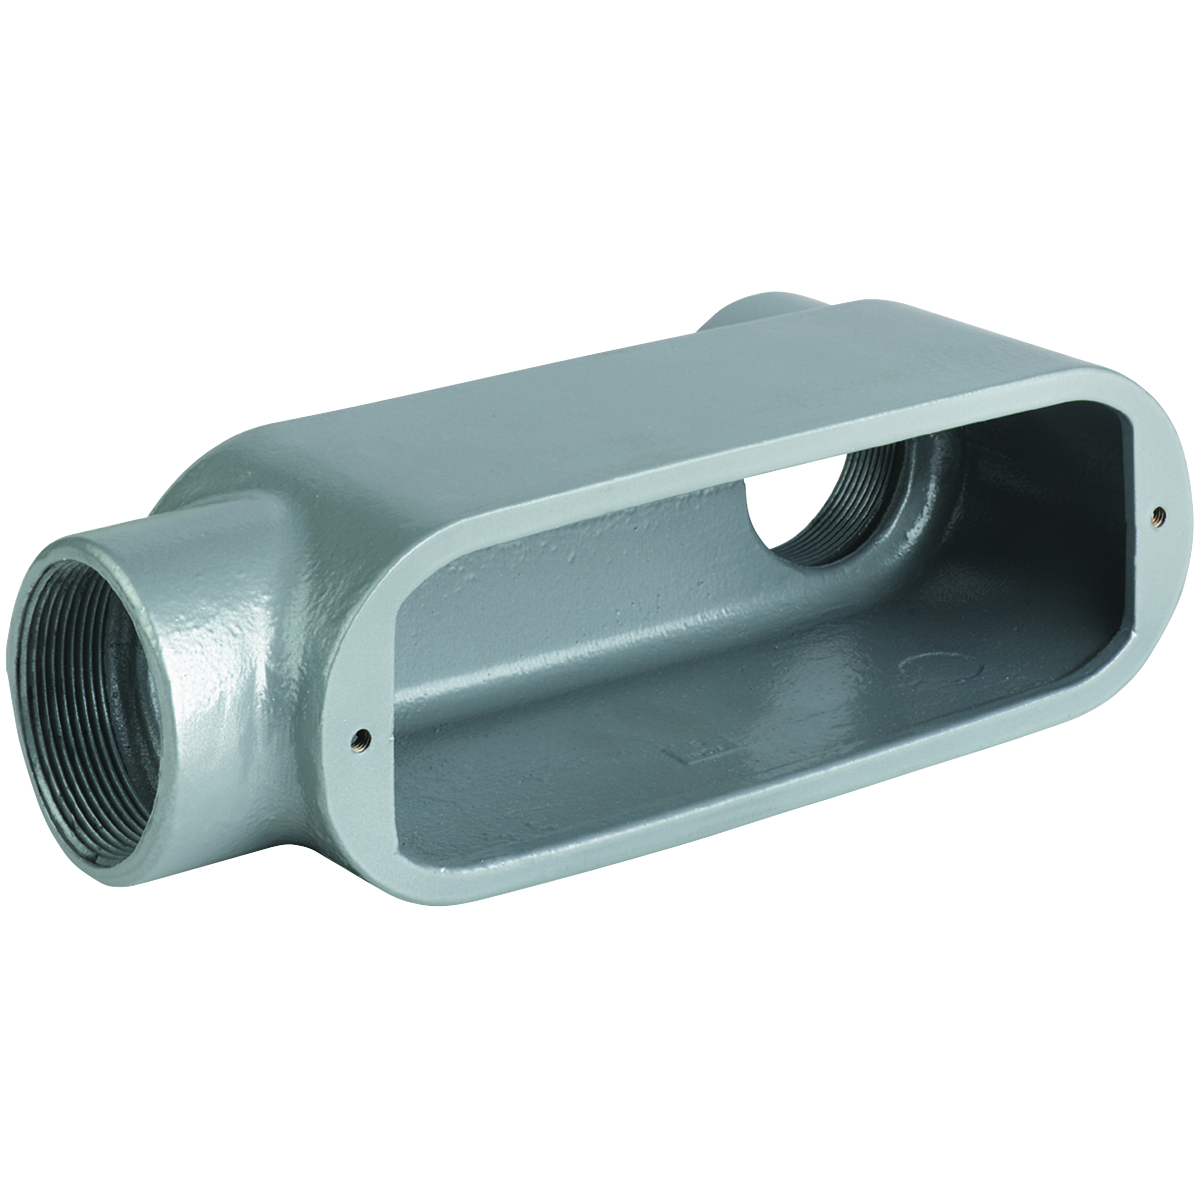 Duraloy 5 Malleable Iron Conduit Bodies & O Series AluminumPopular choice for commercial & industrial applicationsThreaded for rigid conduit and IMCRaintight when used with gasketed coversTri-coat Duraloy finish on iron bodies for superior corrosion protectionInterchangeable with competitive products